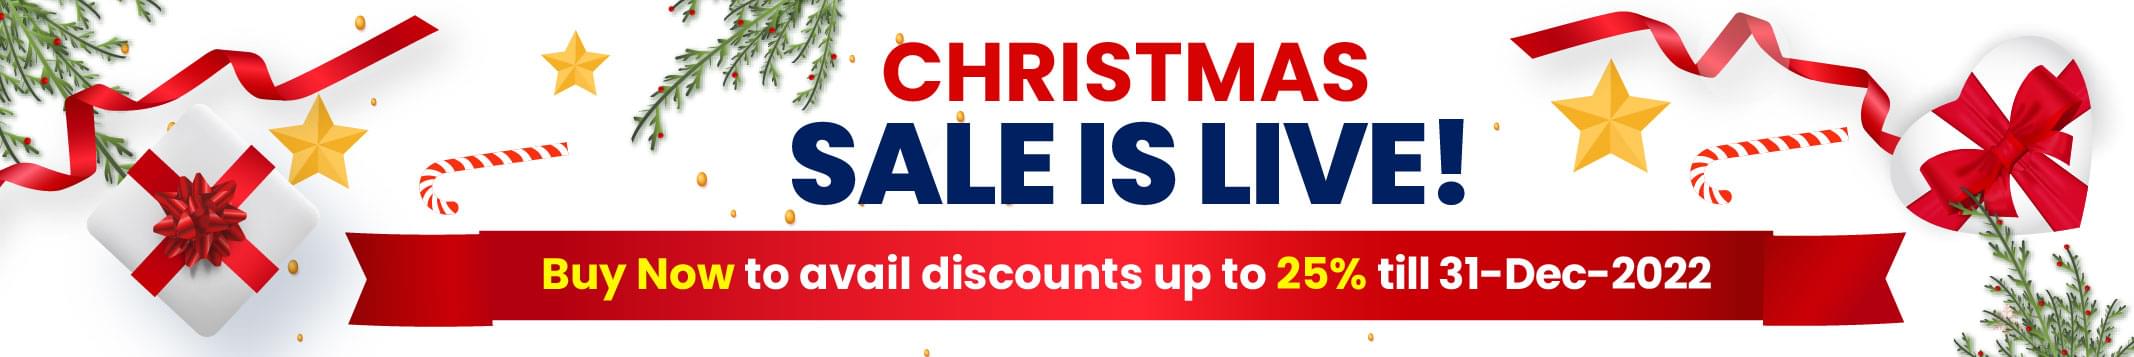 Special Christmas Offer Get Up to 25% Off Immediately